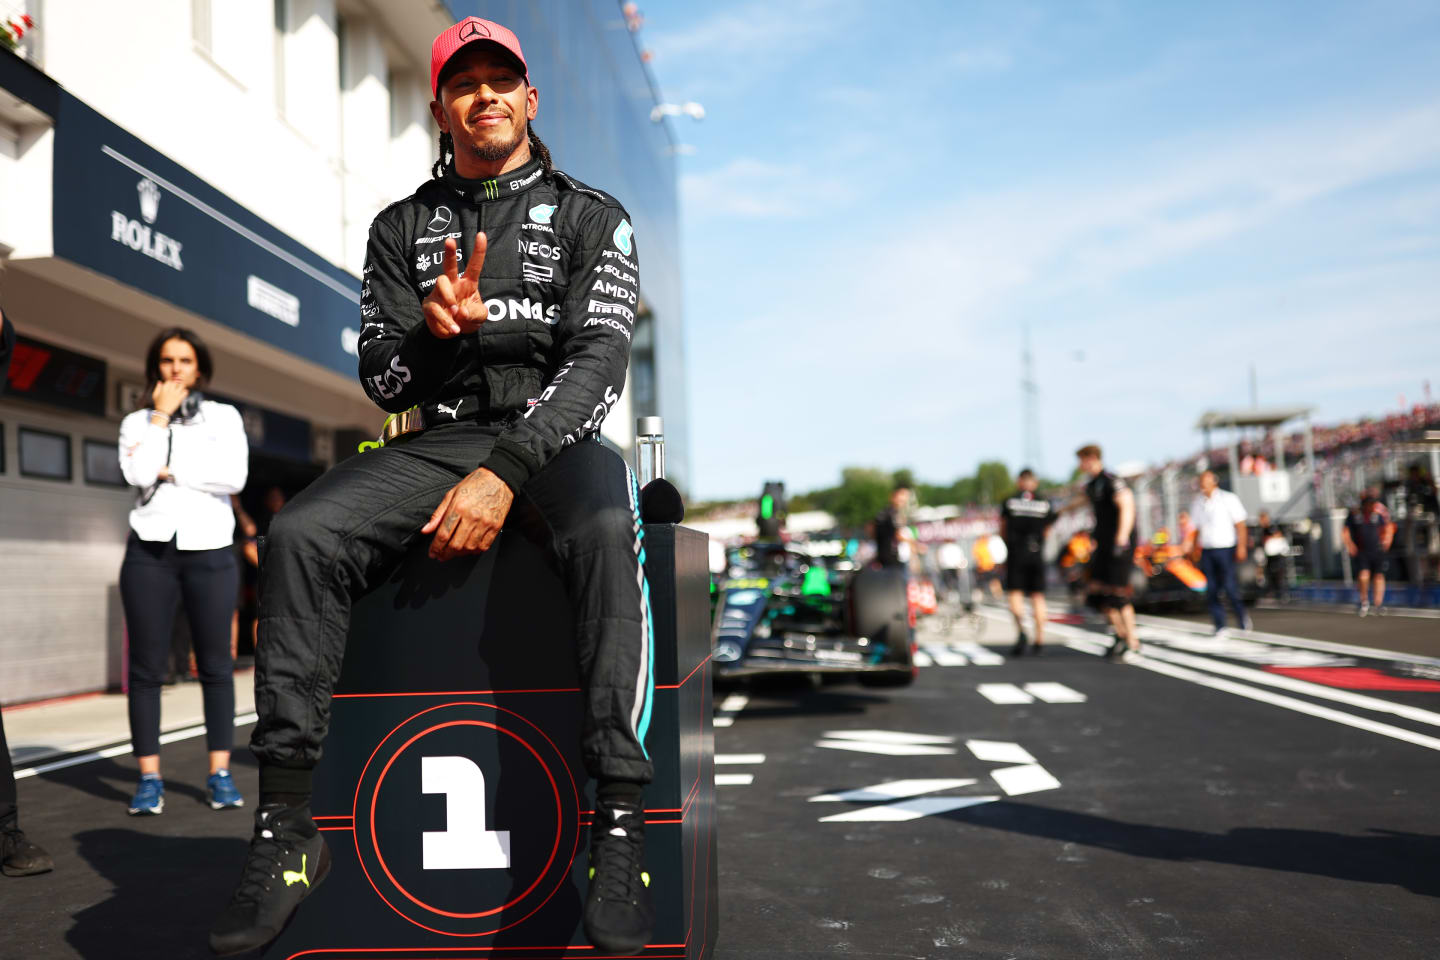 BUDAPEST, HUNGARY - JULY 22: Pole position qualifier Lewis Hamilton of Great Britain and Mercedes celebrates in parc ferme during qualifying ahead of the F1 Grand Prix of Hungary at Hungaroring on July 22, 2023 in Budapest, Hungary. (Photo by Dan Istitene - Formula 1/Formula 1 via Getty Images)